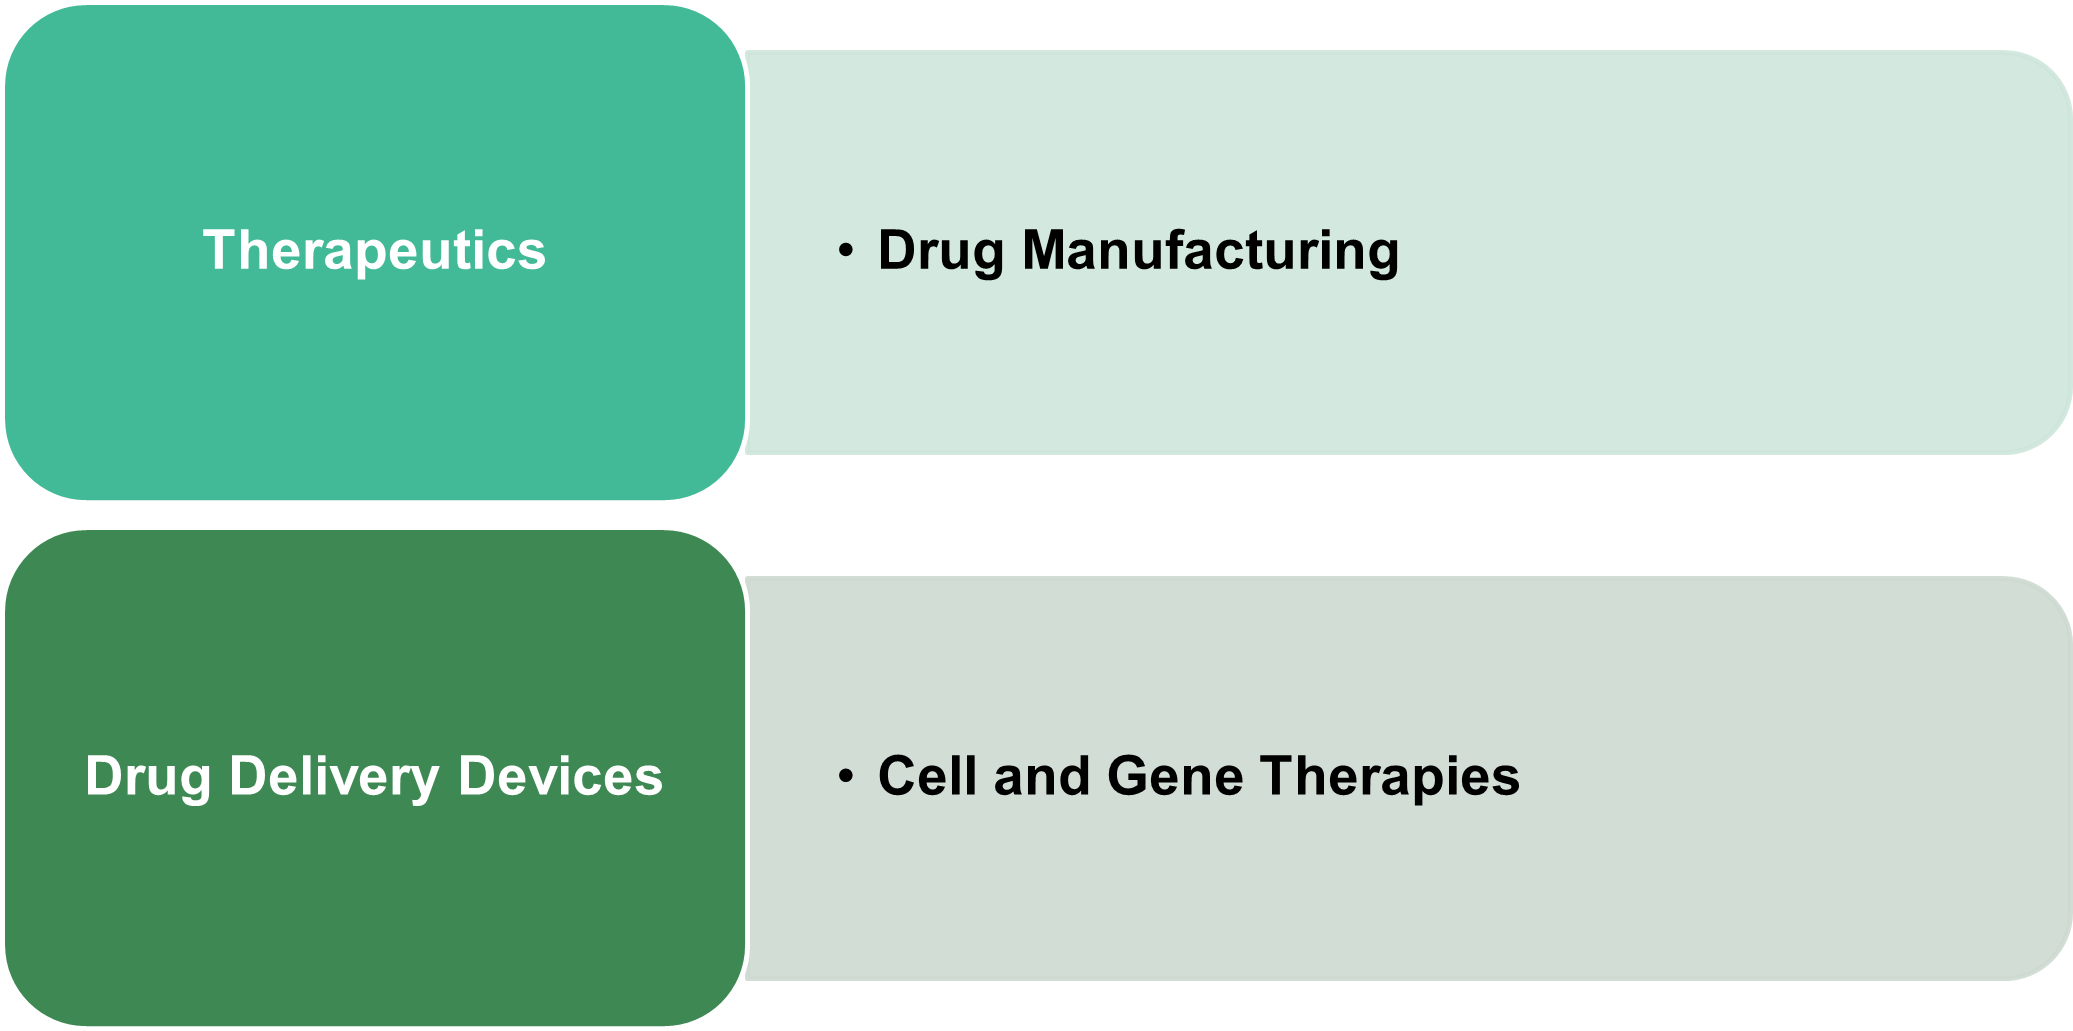 Life Scinece and Biopharmaceutical market